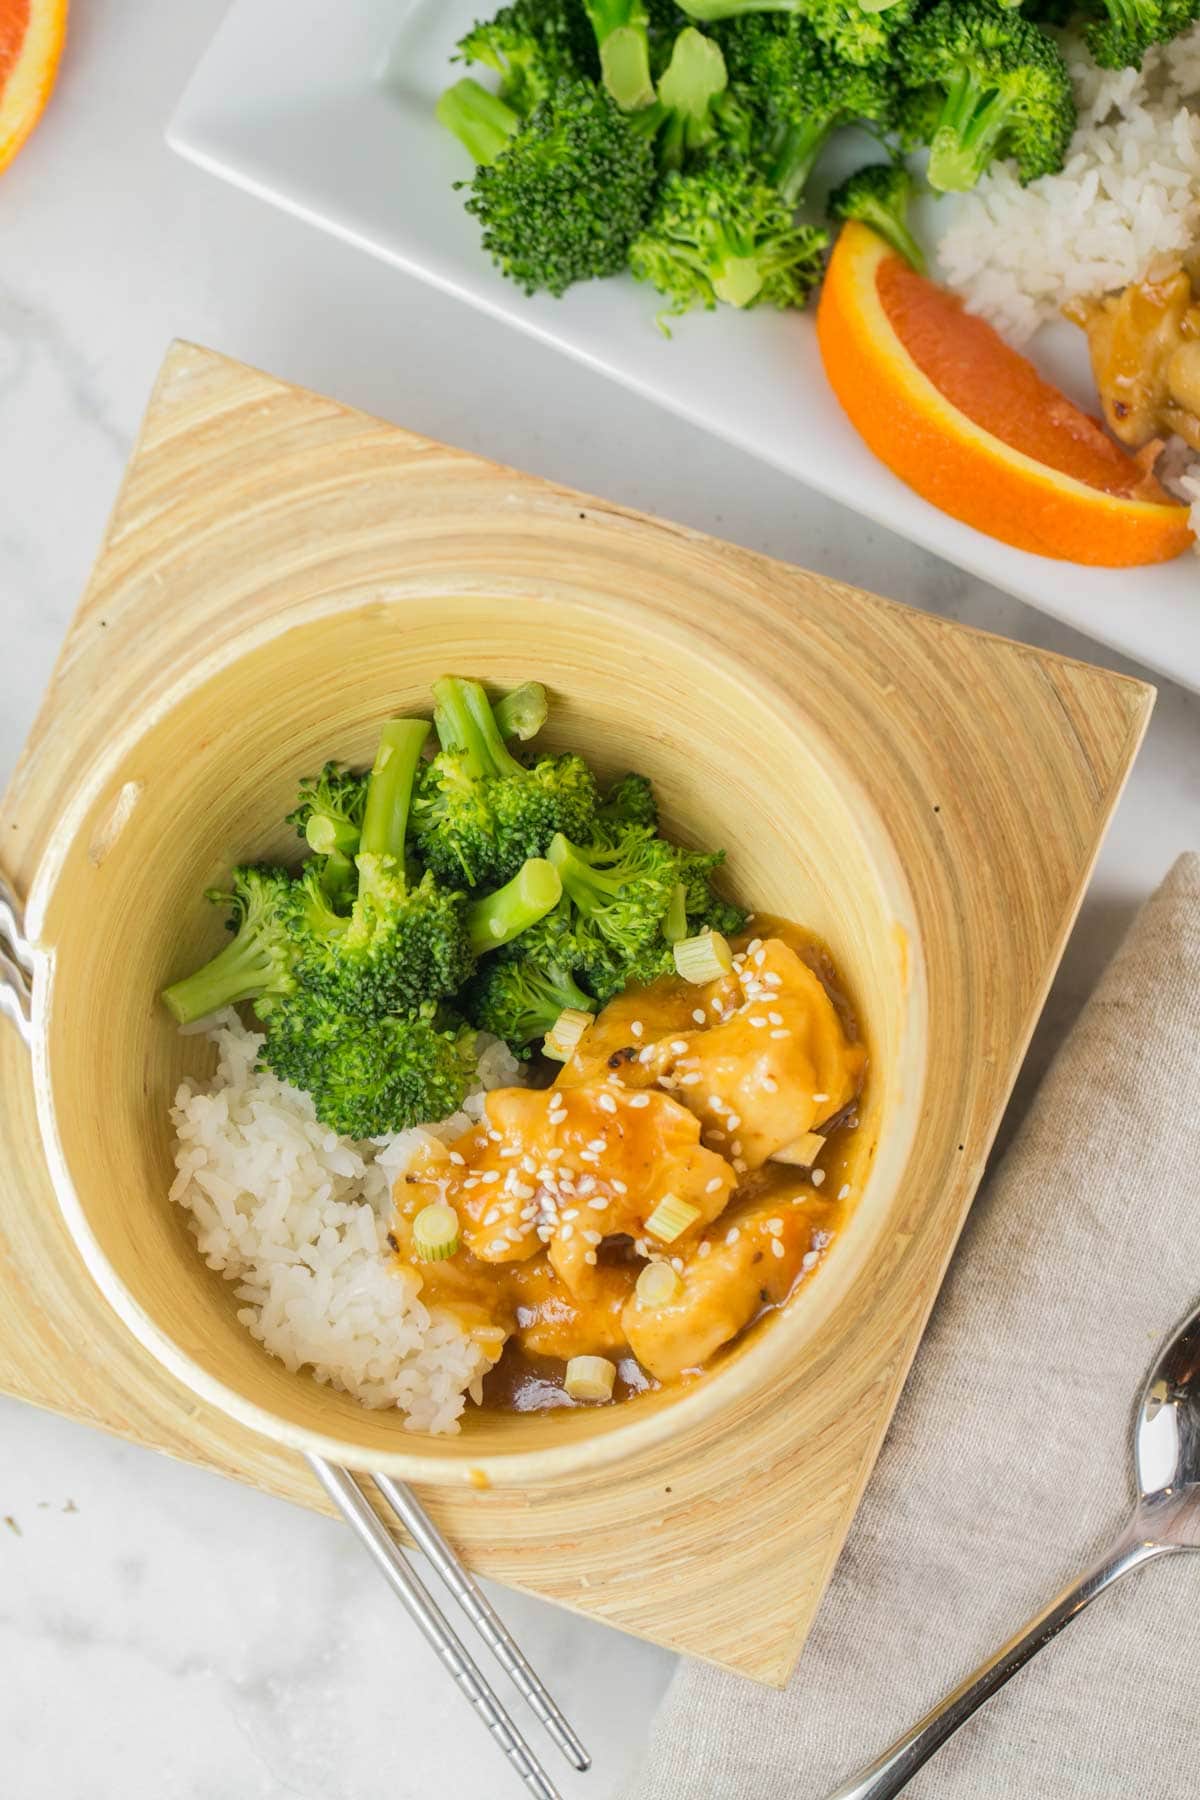 orange chicken, rice, and steamed broccoli in a wooden bowl